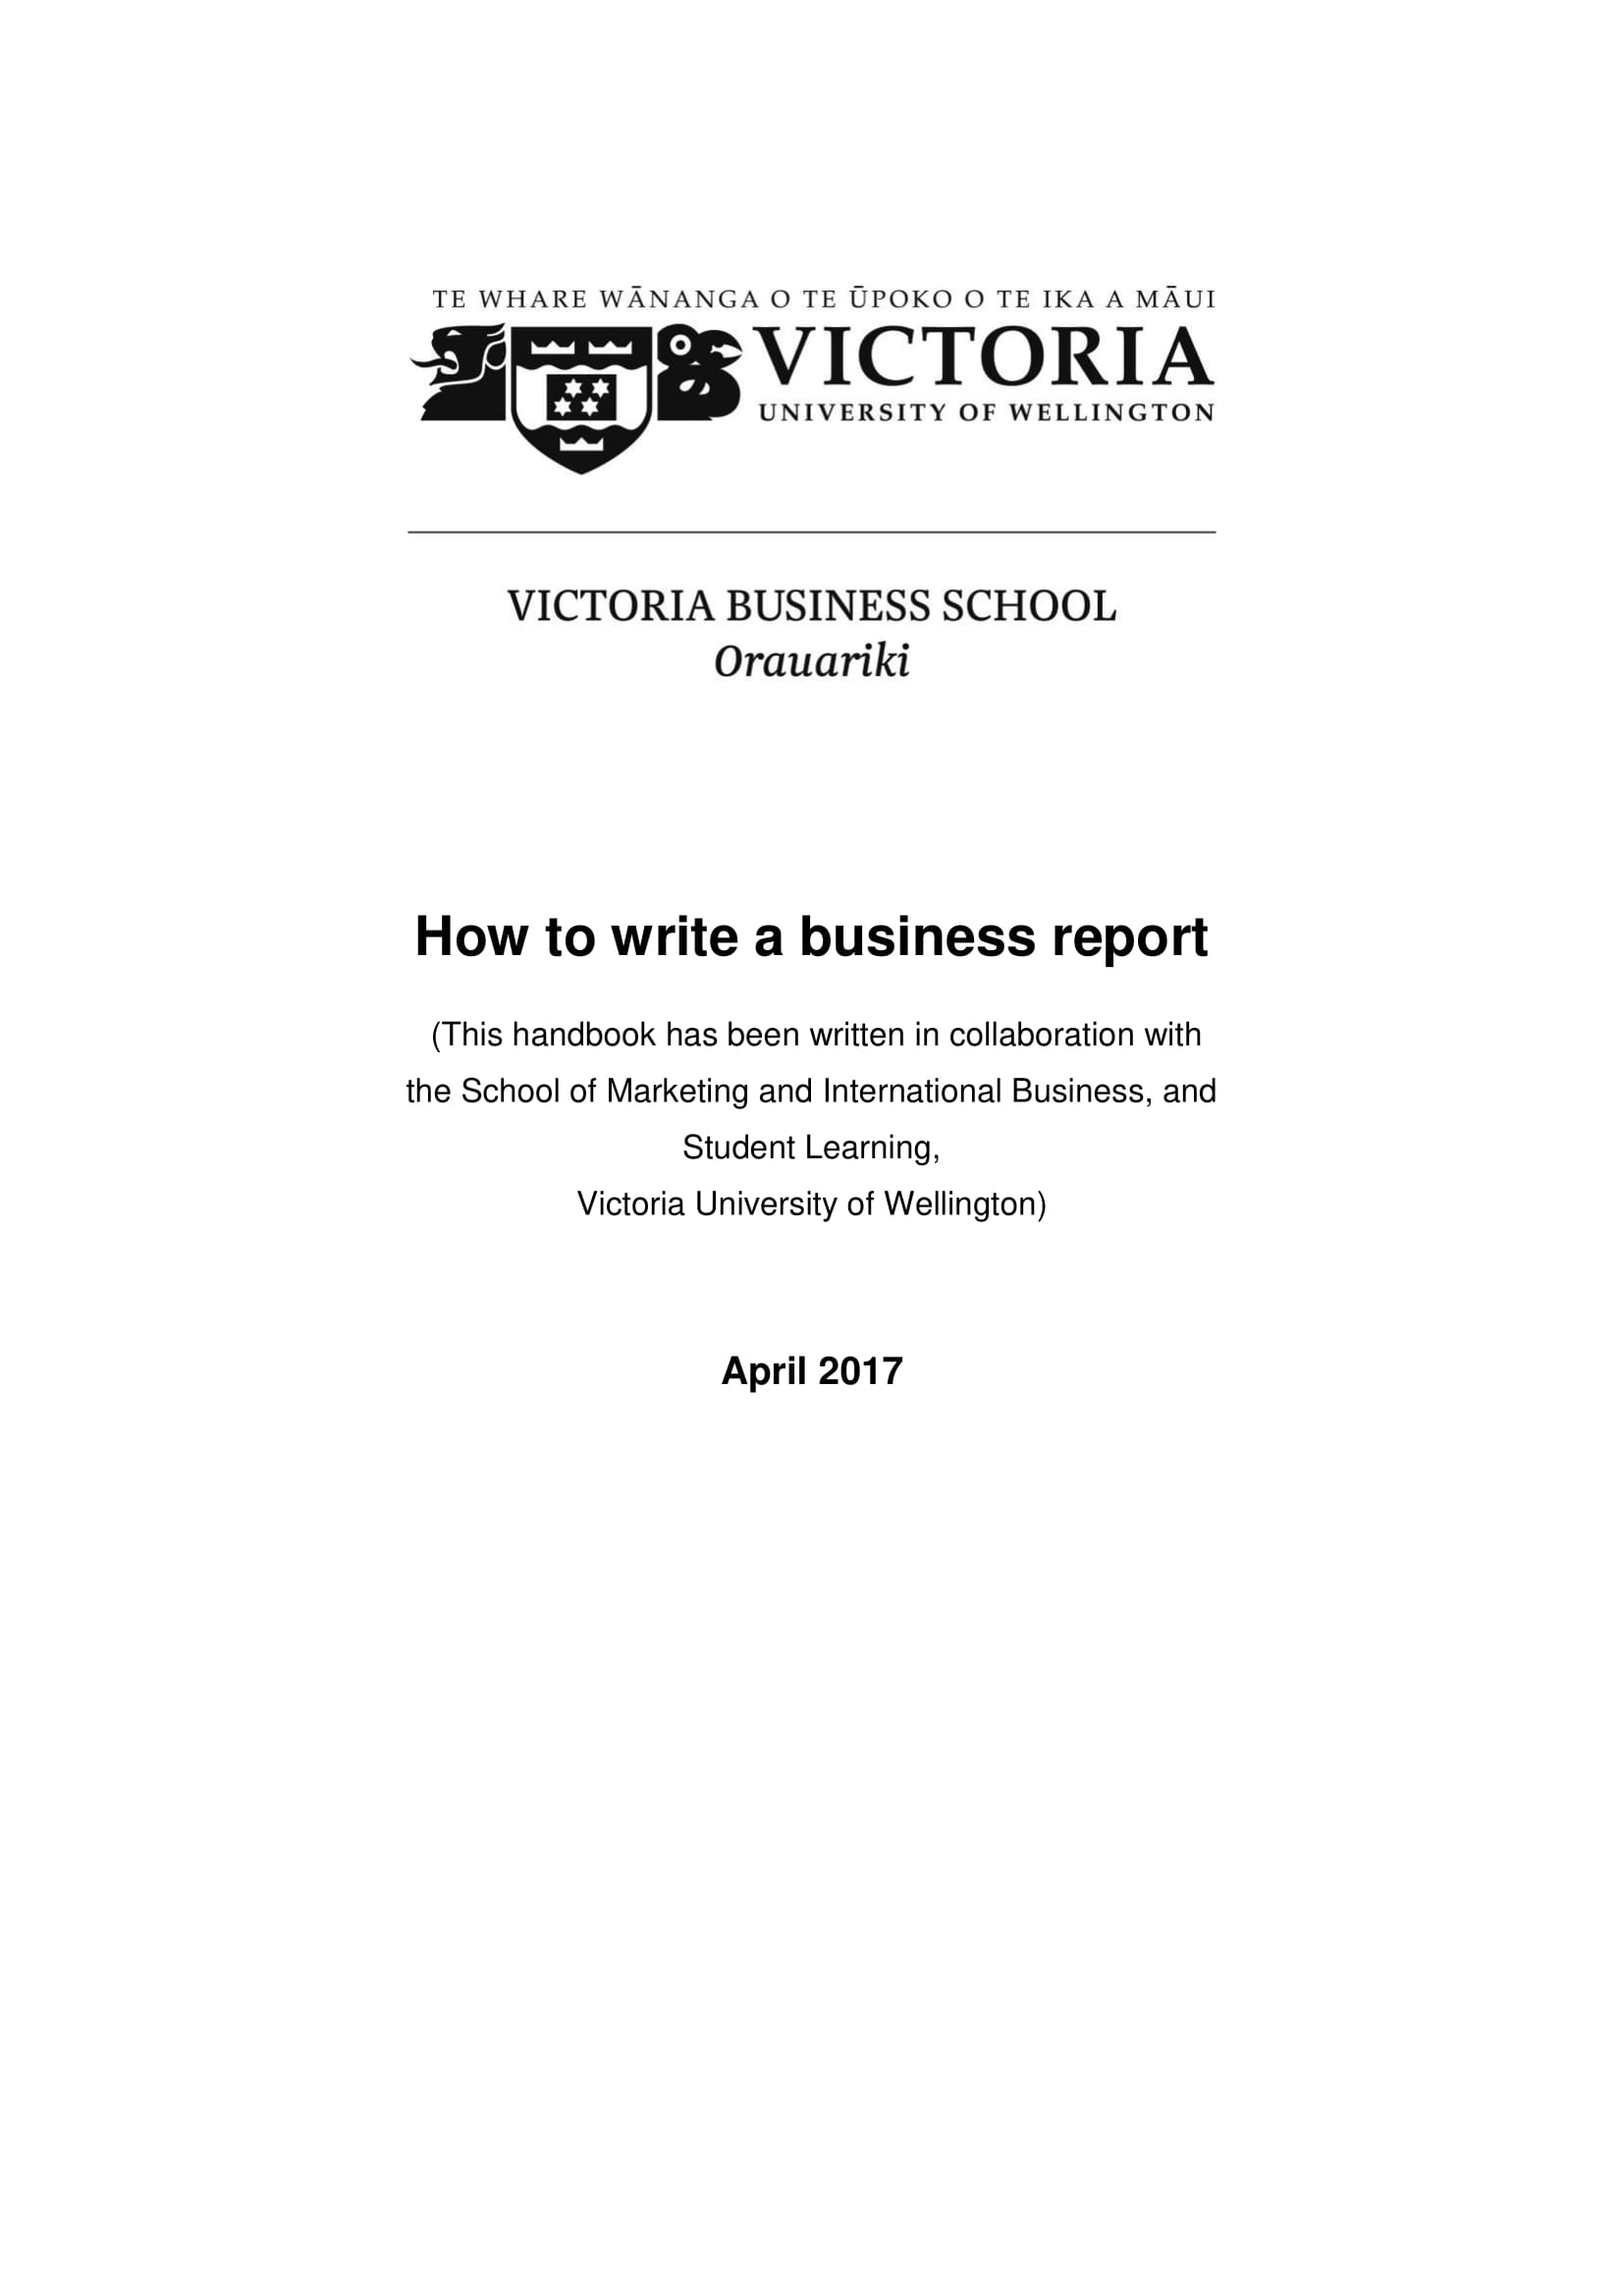 business annual report writing guideline example 01